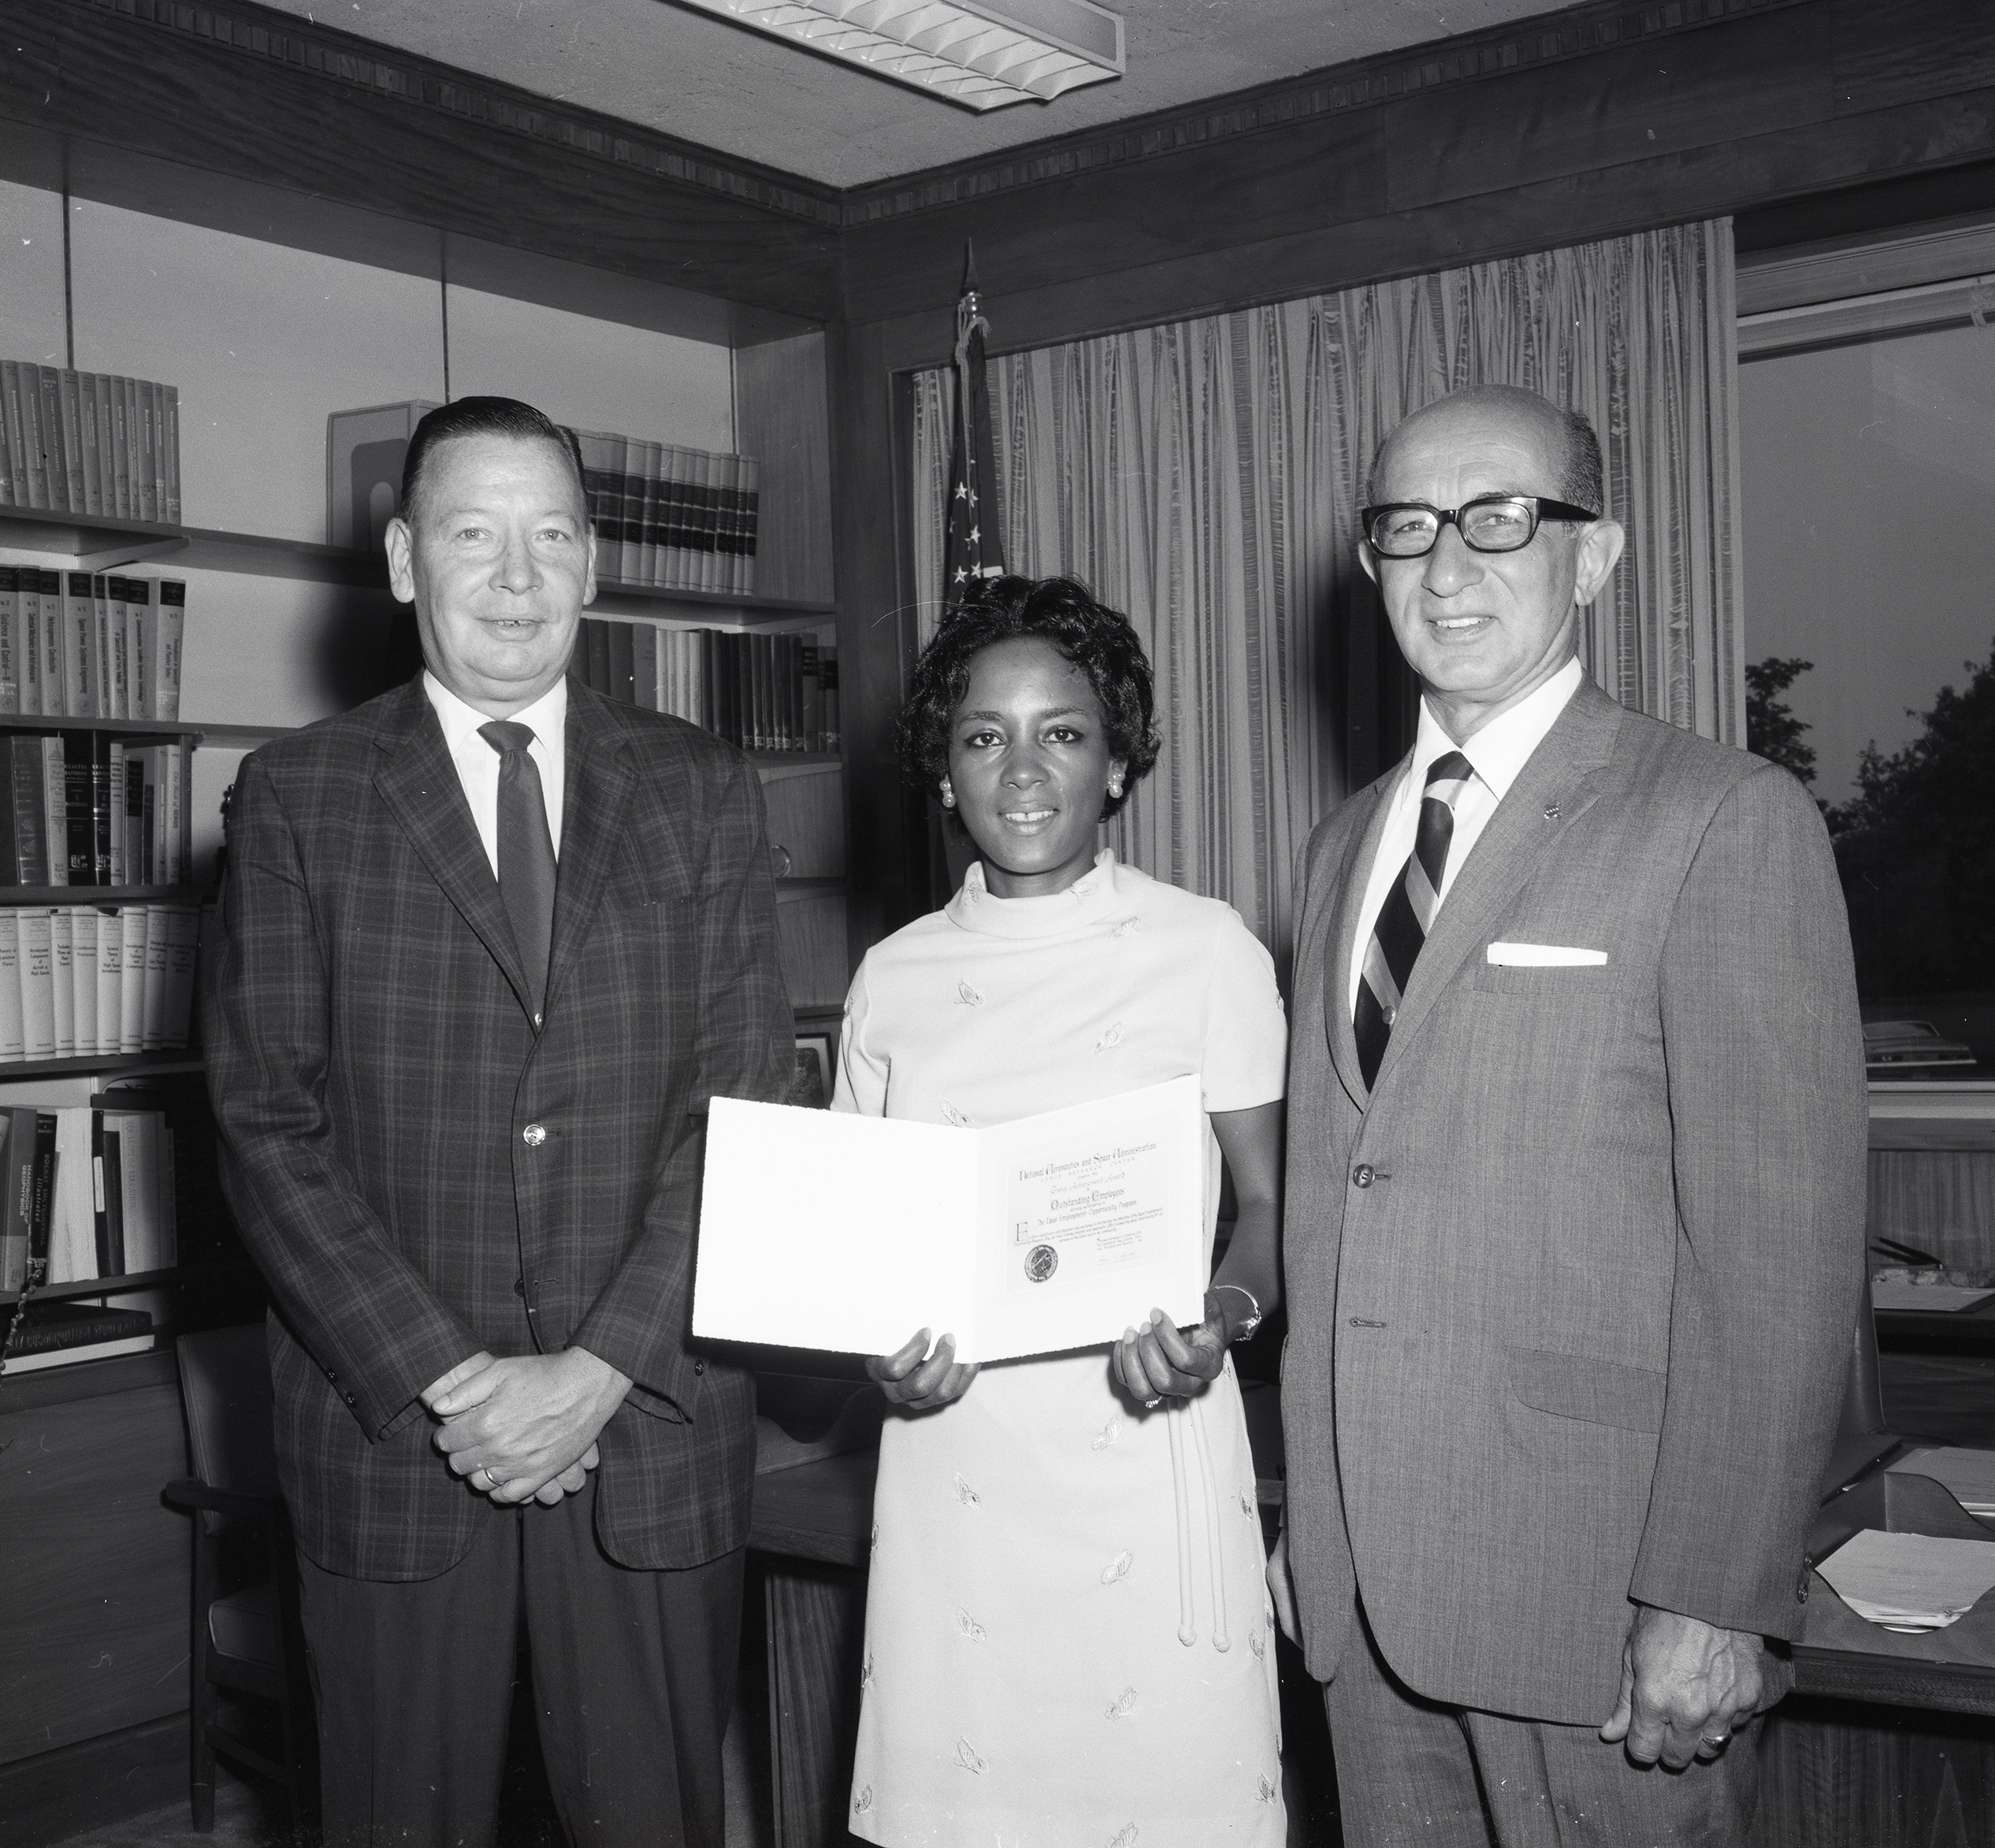 Annie Easley poses with her Special Achievement Award with Director of Administration Henry Barnett on her left and Deputy Director Gene Manganiello on her right.